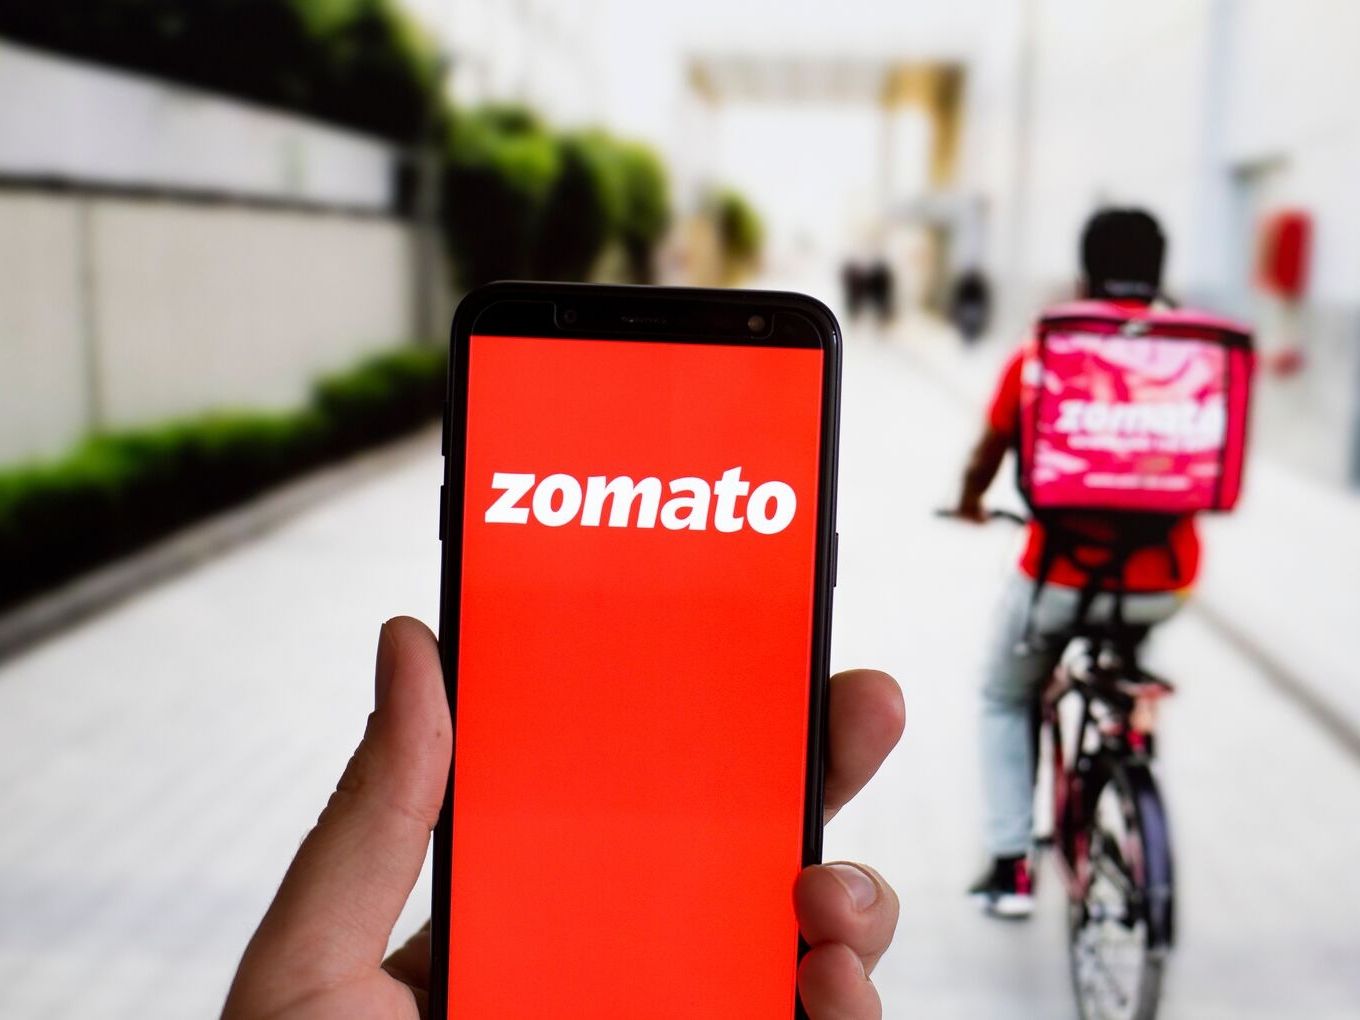 Zomato's Earnings After #LogOut Campaign: Have Protests Eaten Into Growth, Revenue?